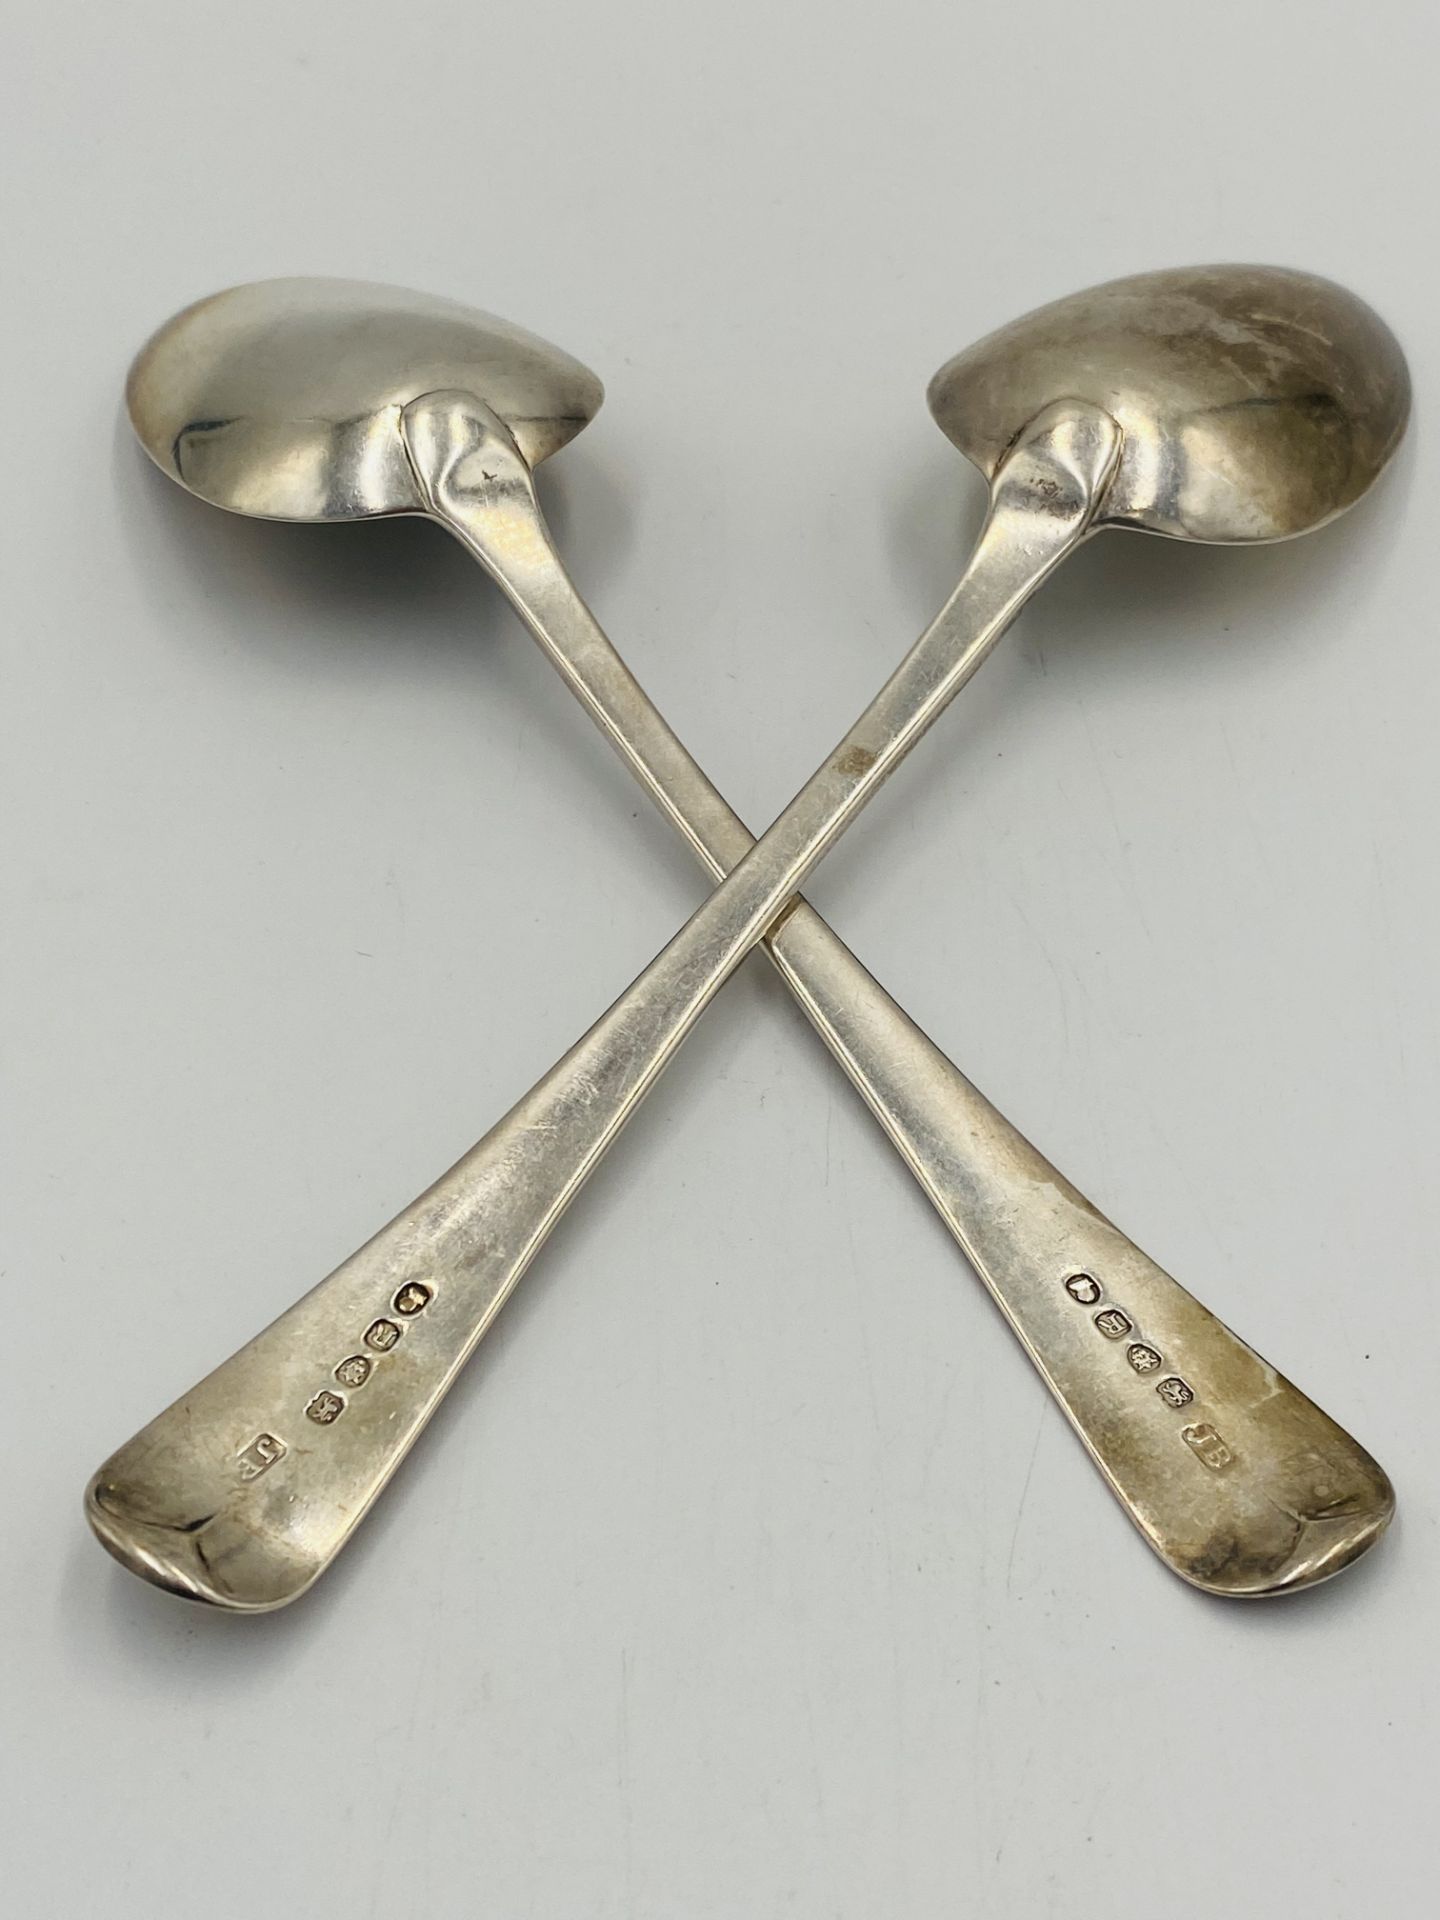 Pair of silver serving spoons - Image 5 of 6